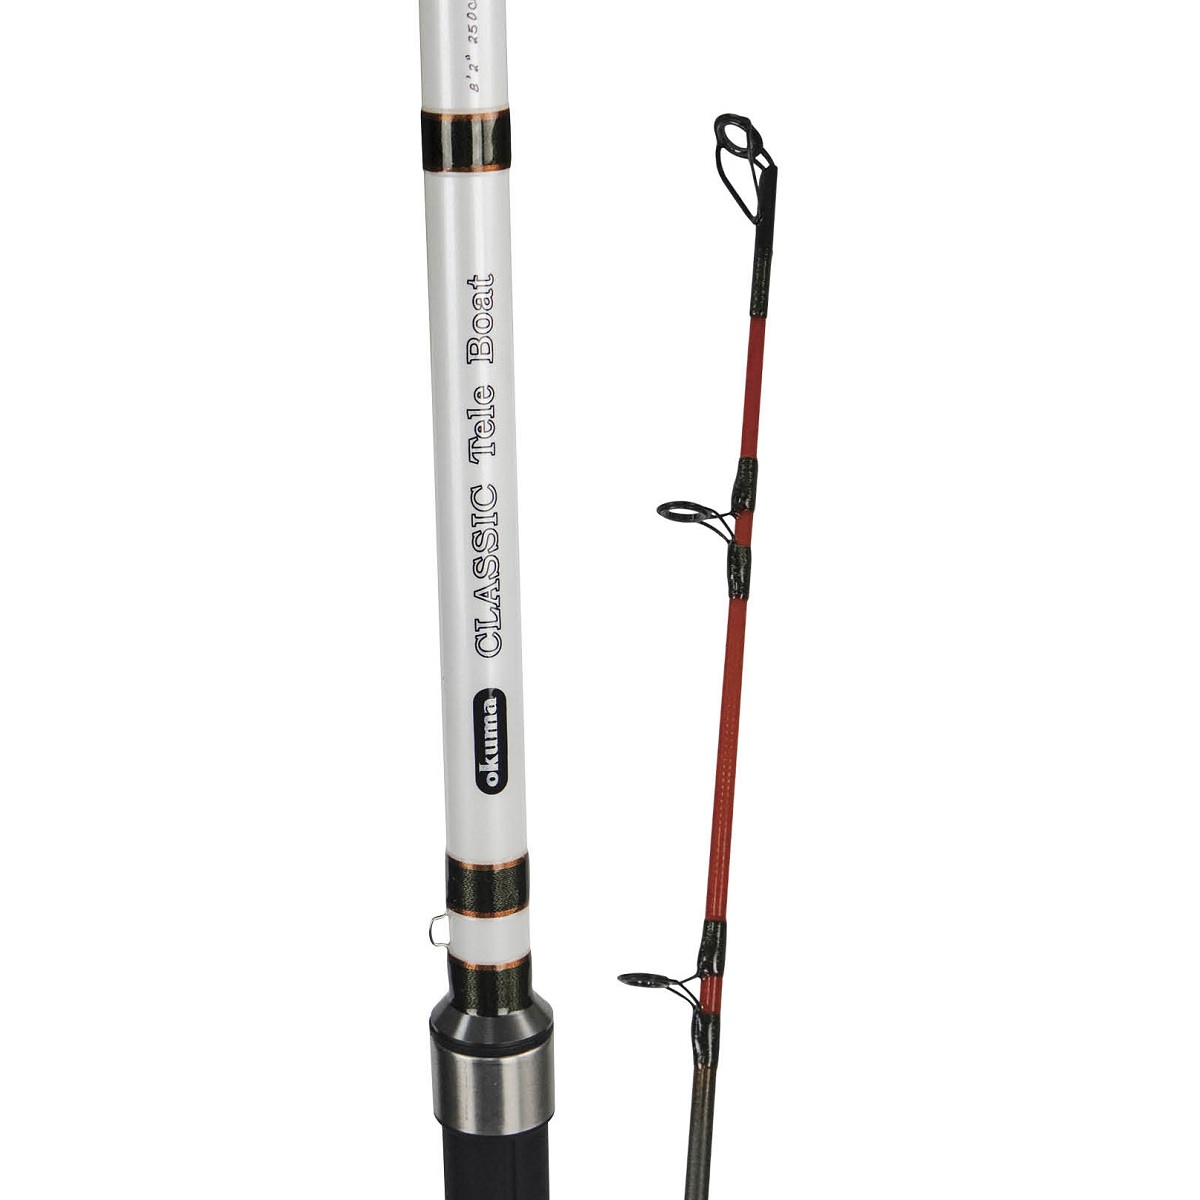 Classic Trolling Rod - Okuma Classic Trolling Rod-UFR® strengthened blanks-Quality saltwater resistant components-Full Carbon quality blanks